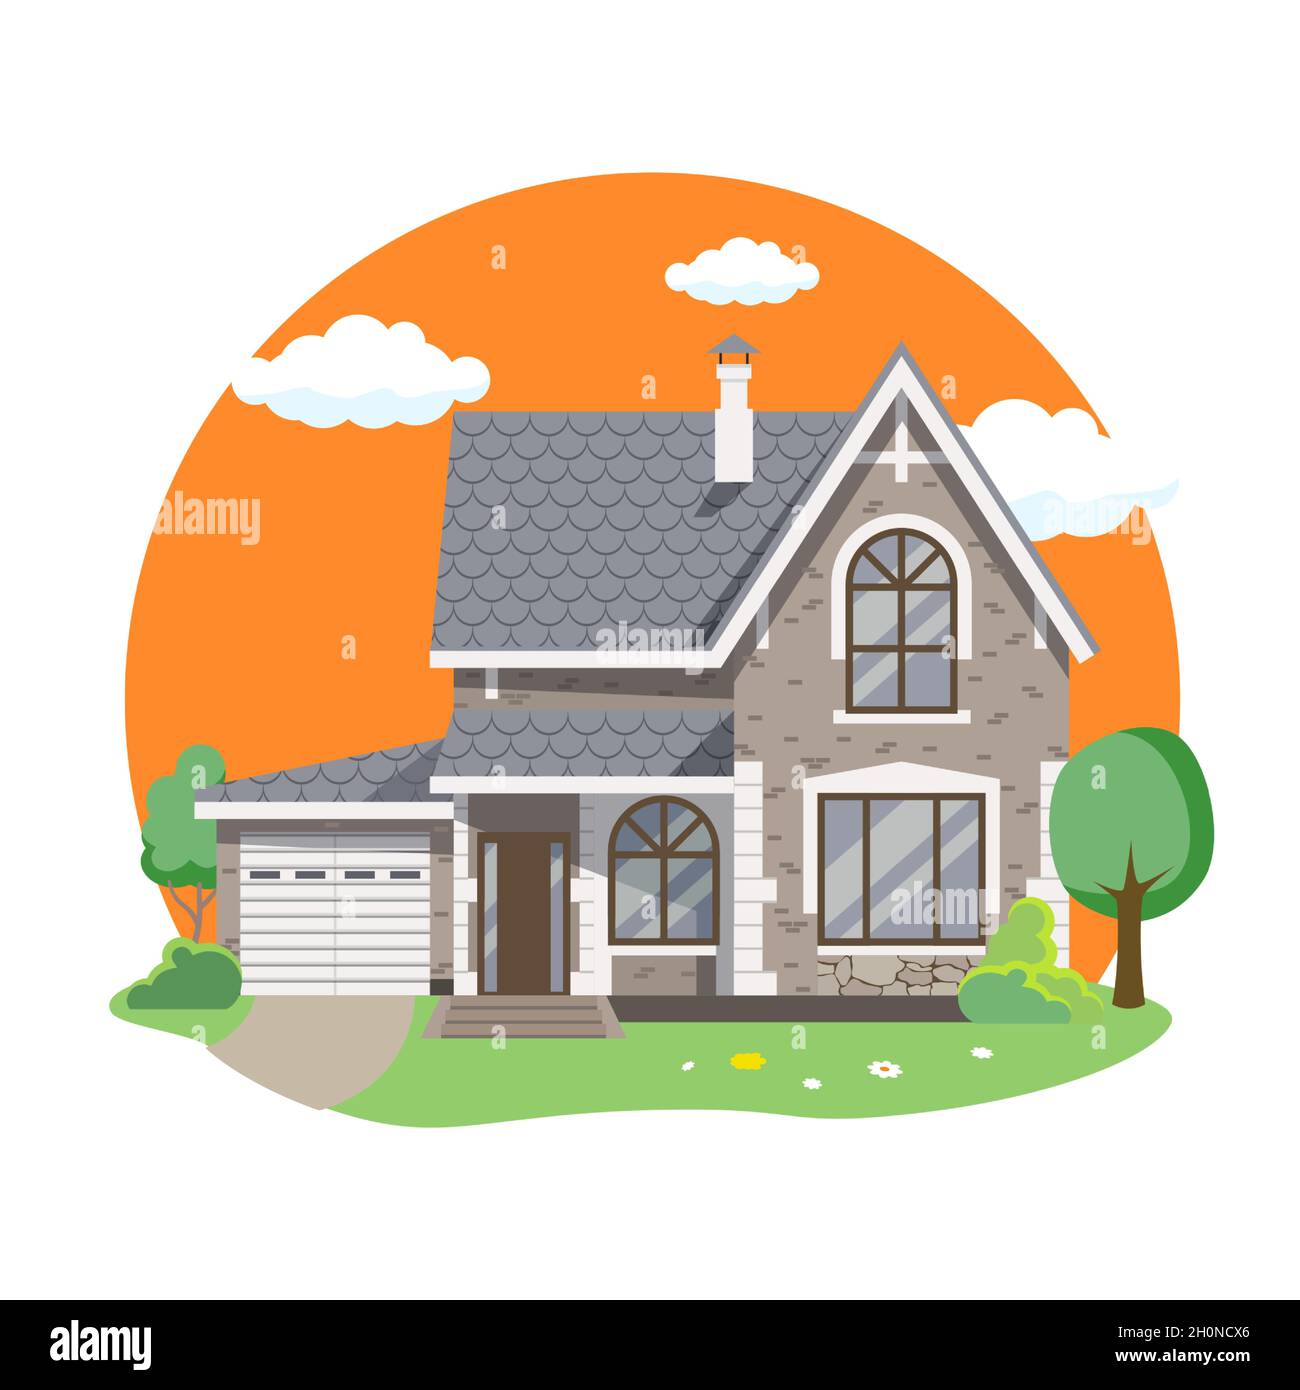 Cartoon house exterior with blue clouded sky Front Home Architecture Concept Flat Design Style. Vector illustration of Facade Building Stock Vector